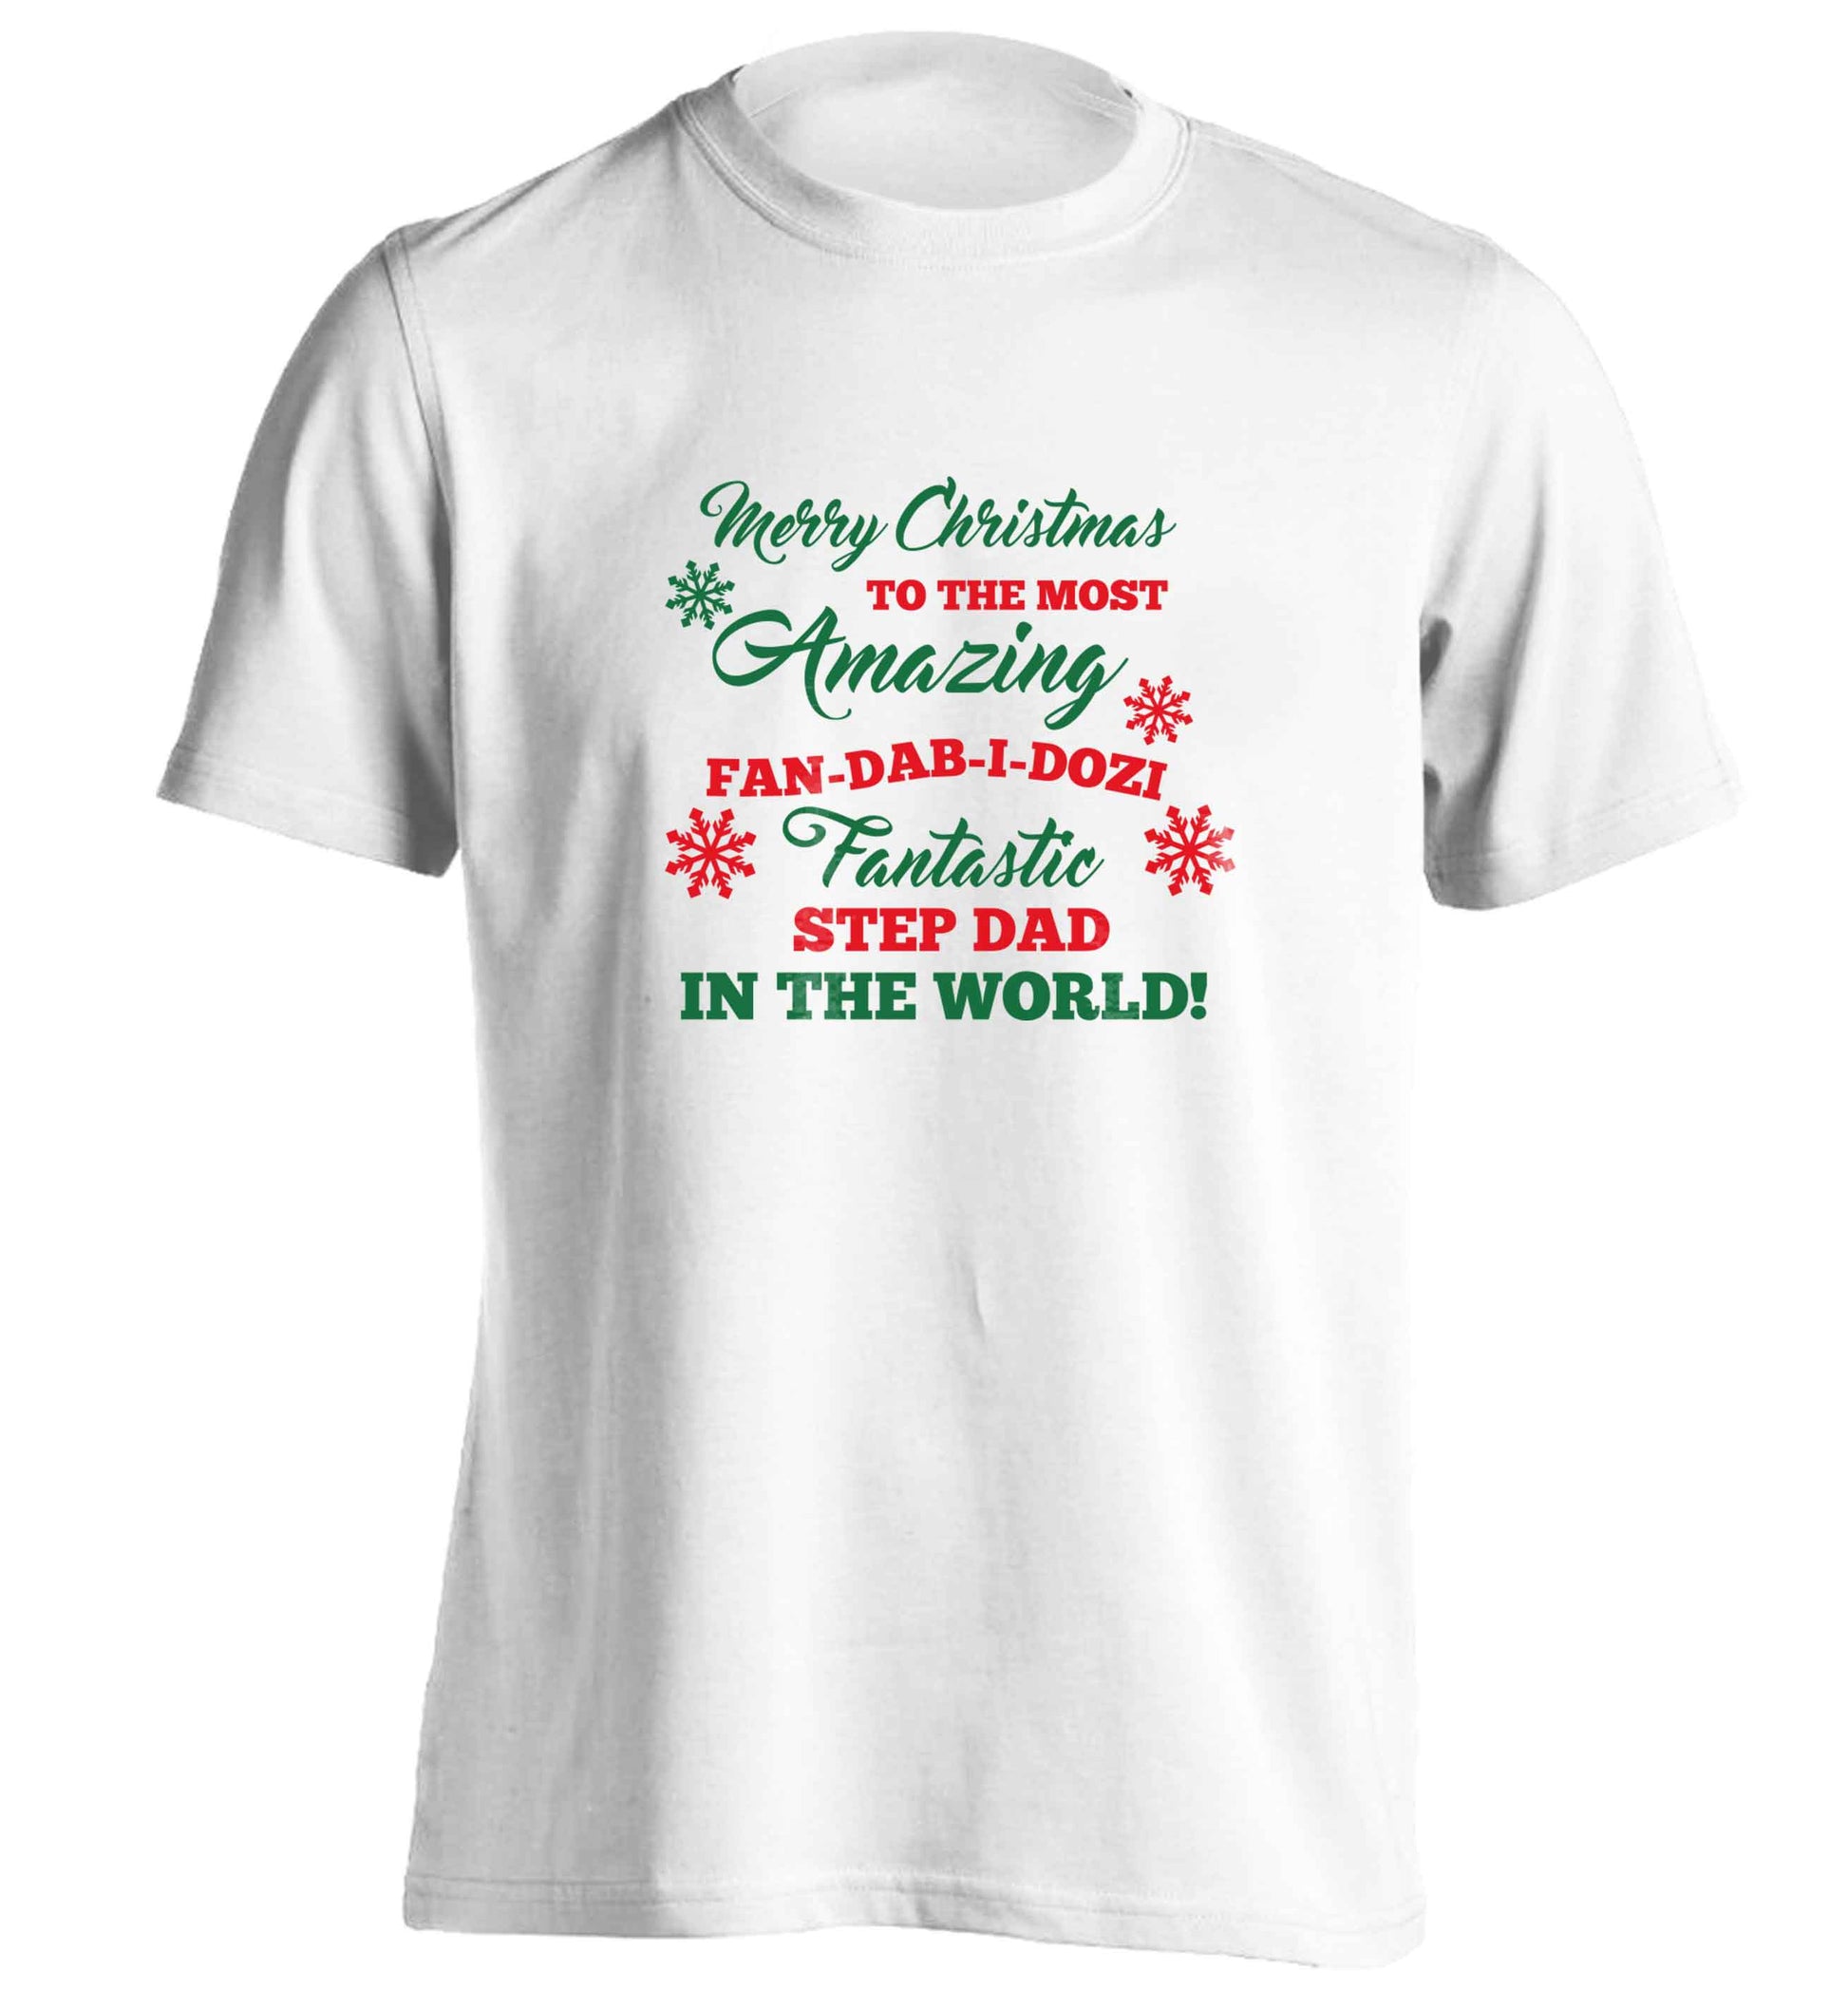 Merry Christmas to the most amazing fan-dab-i-dozi fantasic Step Dad in the world adults unisex white Tshirt 2XL